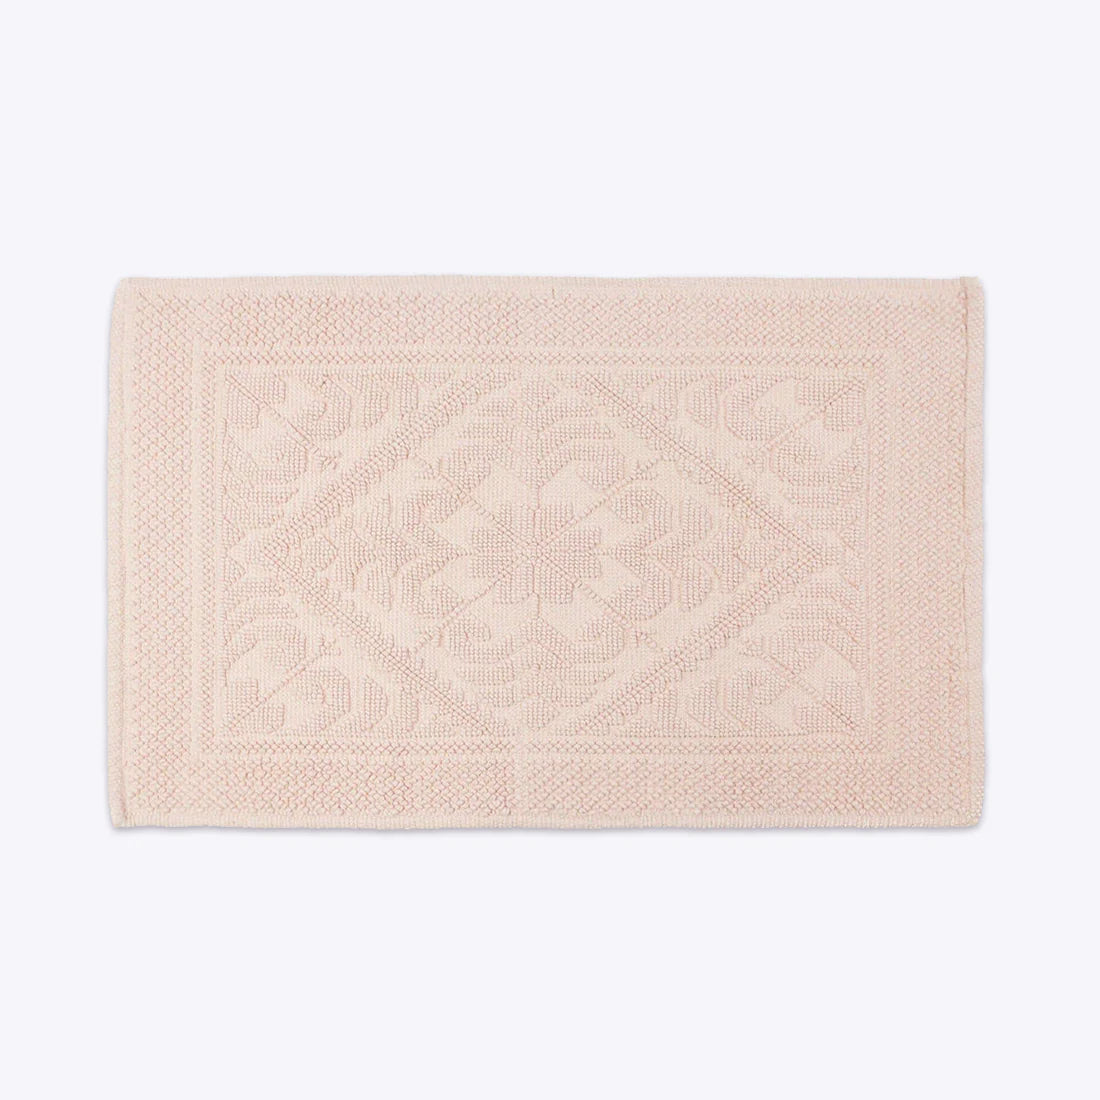 Country Style Jacquard Design Bath Towels in Blush